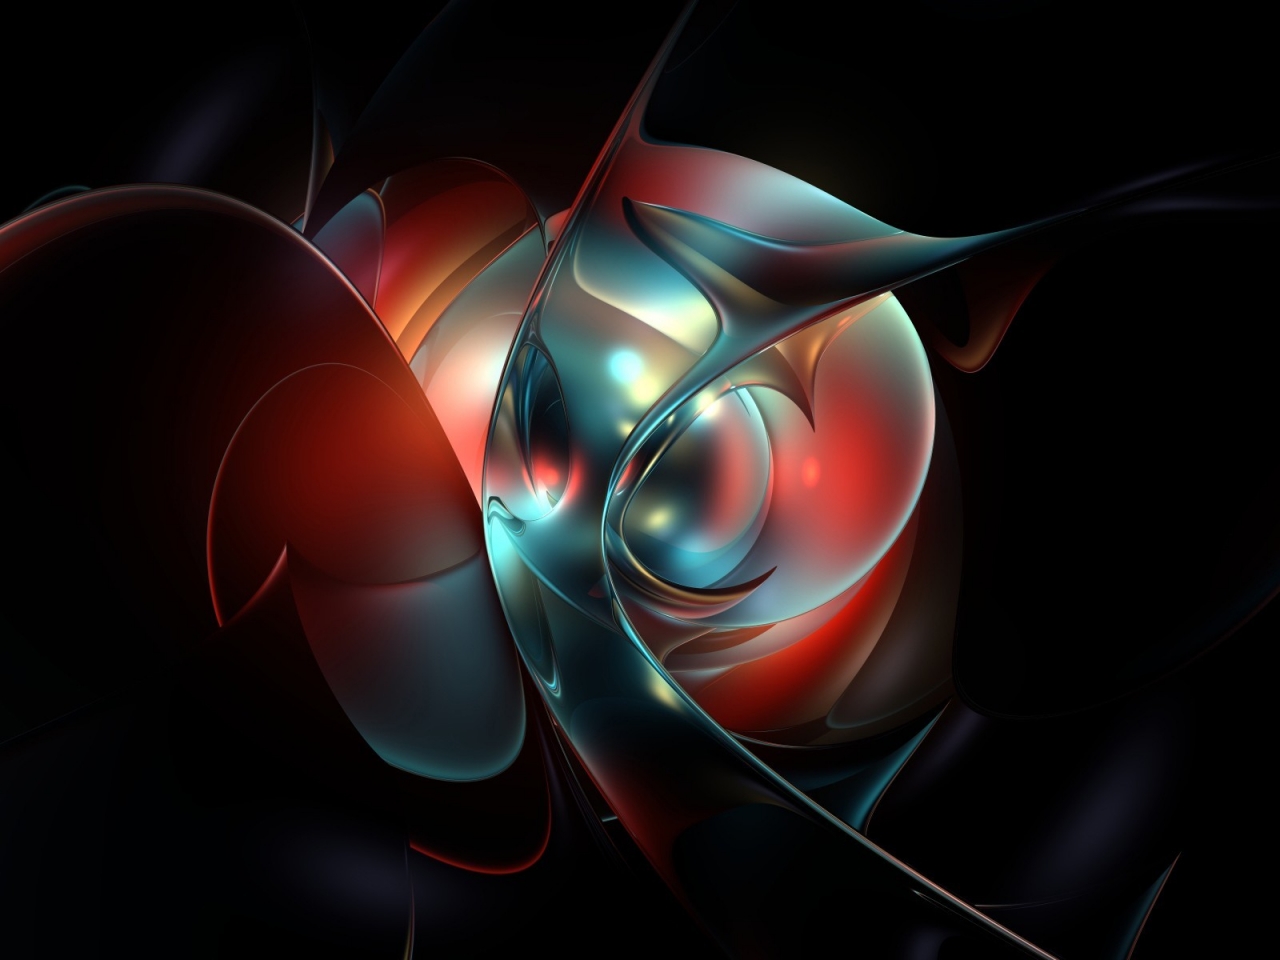 Abstract Geometric Shapes for 1280 x 960 resolution